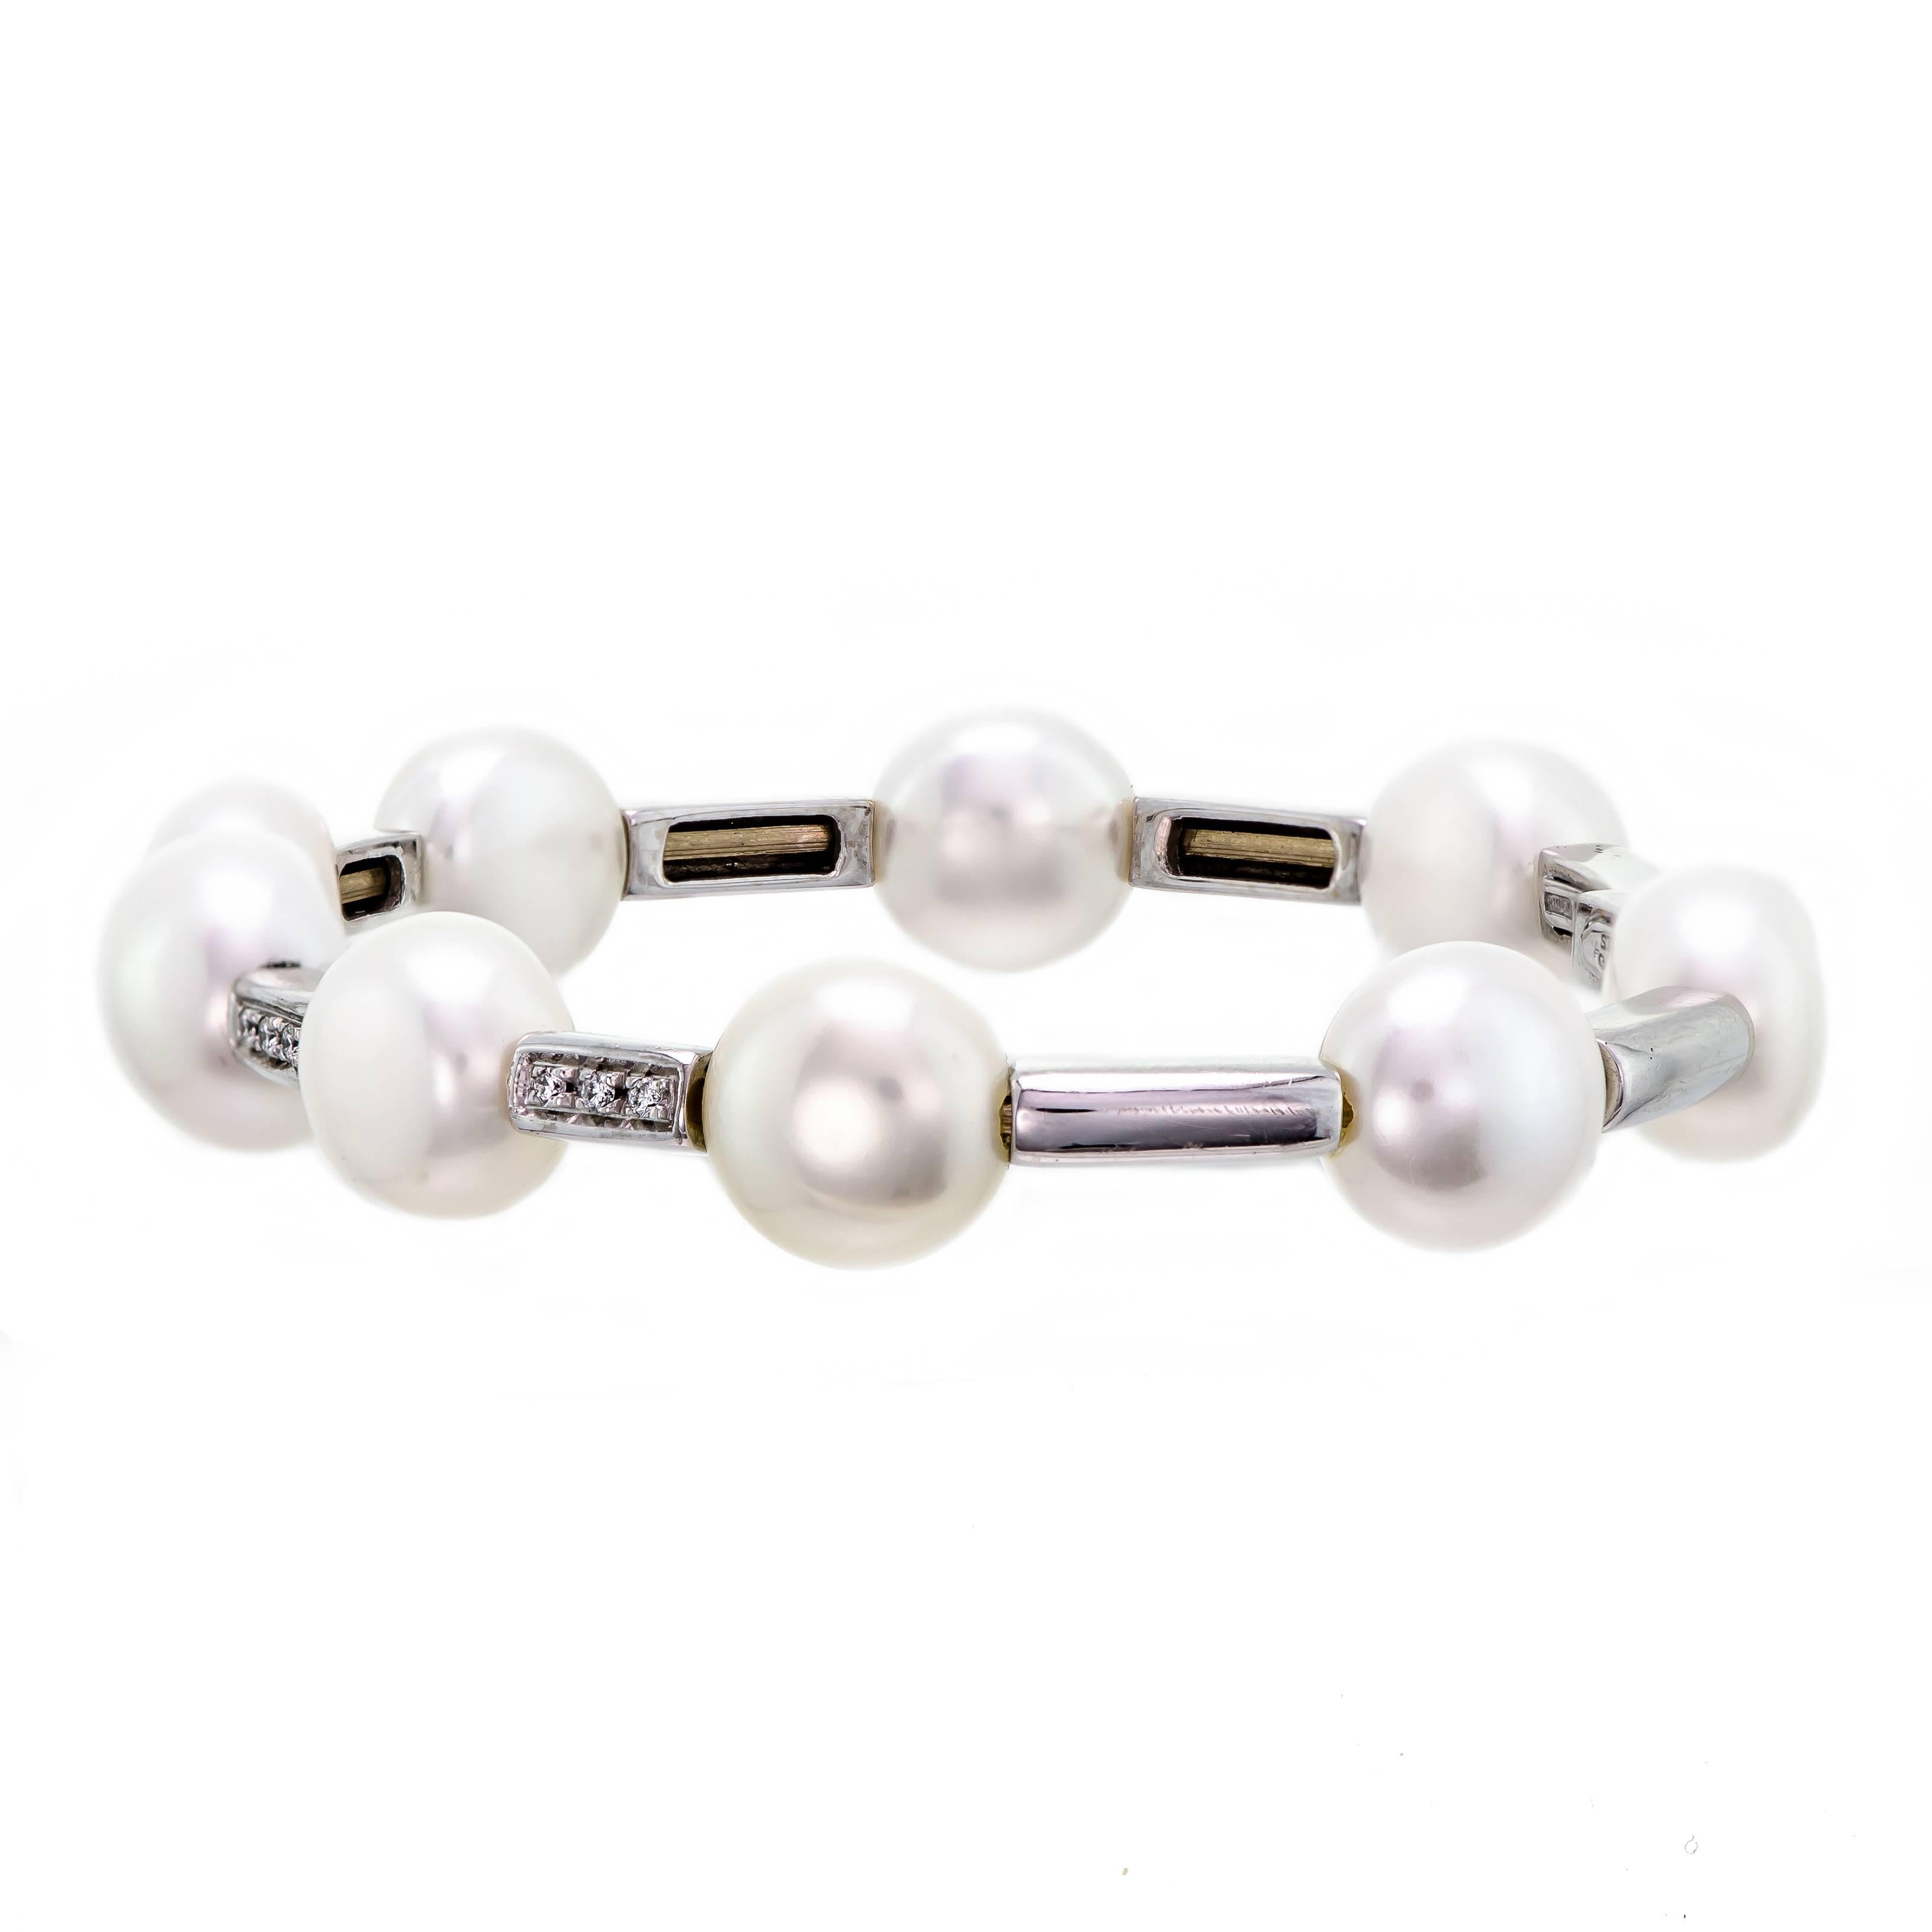 A Classic Design by Sidney Garber this freshwater pearl, and diamond flexible cuff bracelet is crafted in 18 karat white gold. Alternate links of polished white gold sit between freshwater pearls allowing the bracelet to move with ease. Four (4) of